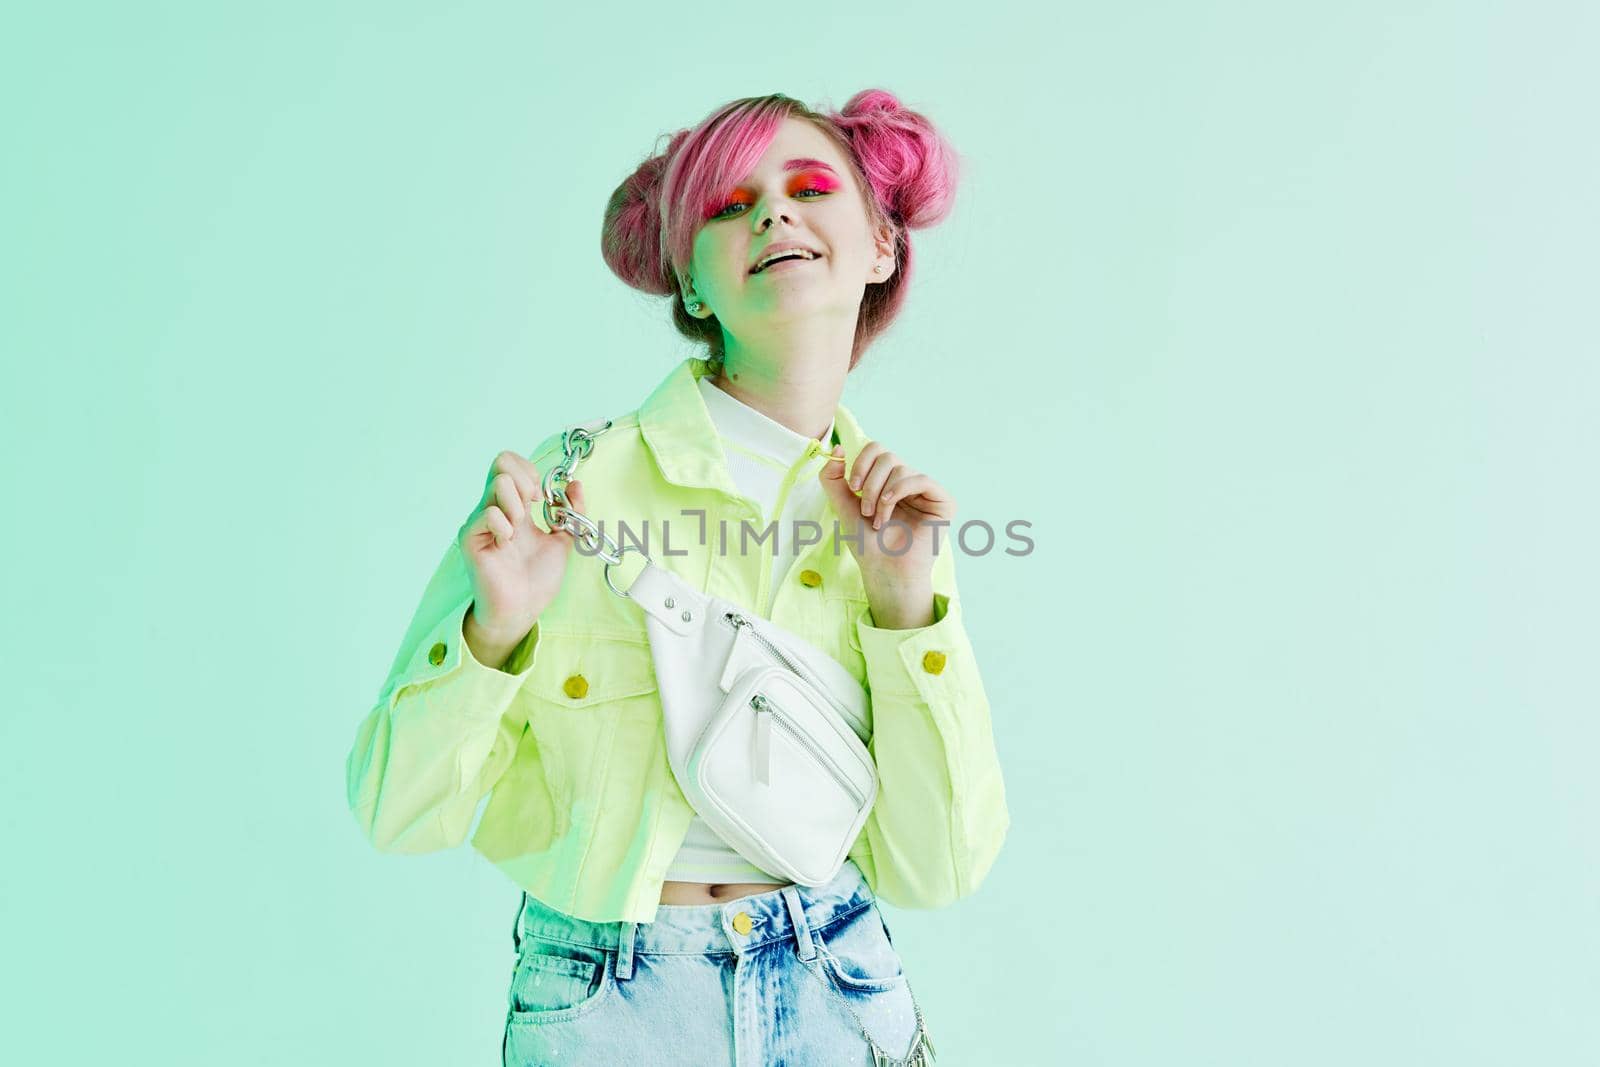 cheerful woman with bright makeup pink hair Glamor posing fun by Vichizh